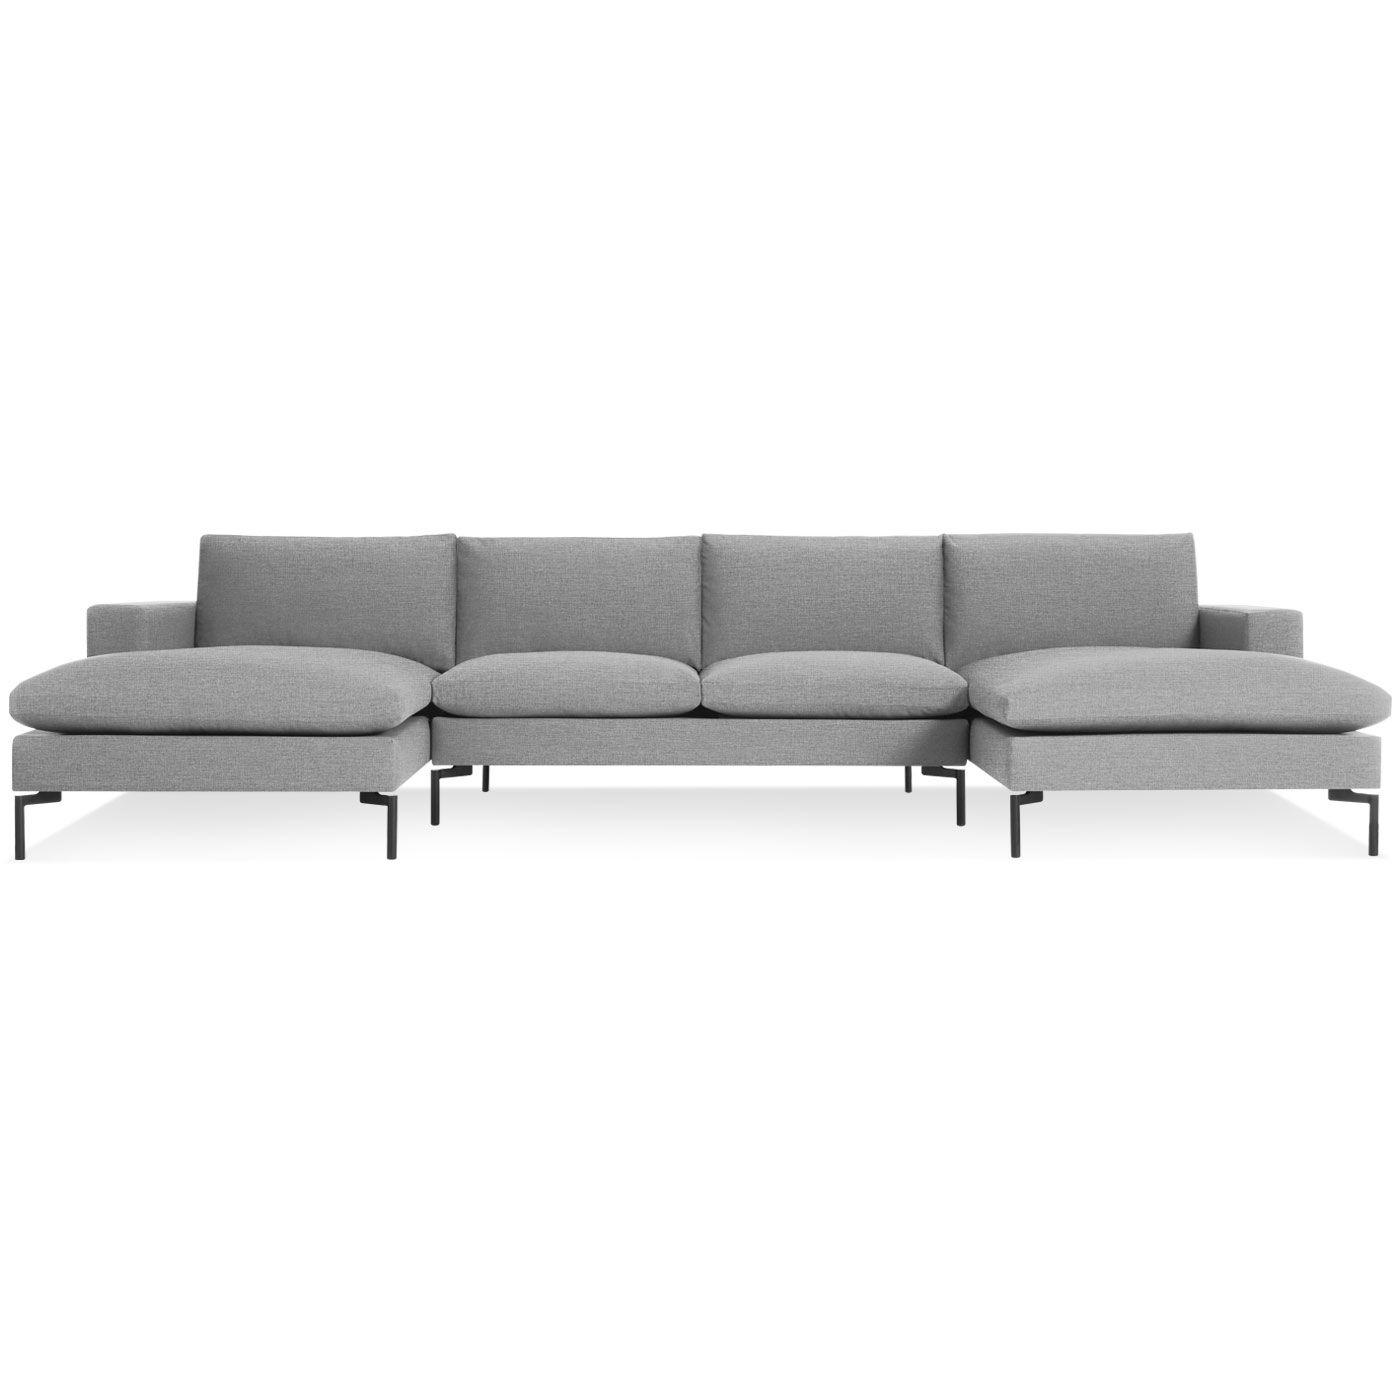 Featured Photo of 10 Inspirations Modern U Shaped Sectional Sofas